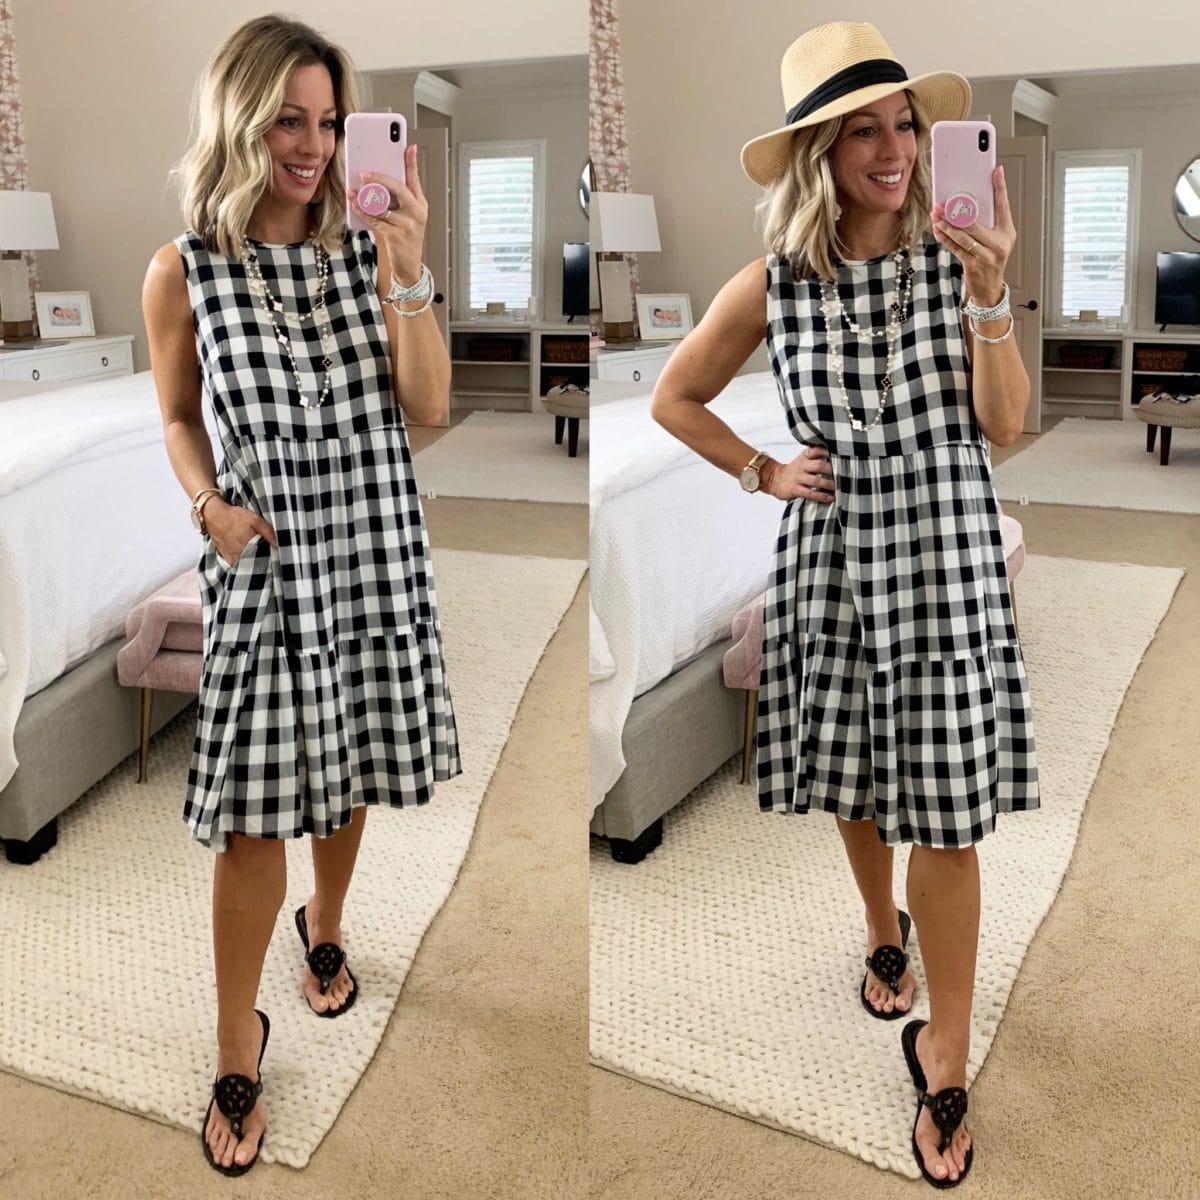 Black and White Checkered Boho Dress, Black Miller Dupe Sandals, Straw Hat, Pearl Clover Necklace